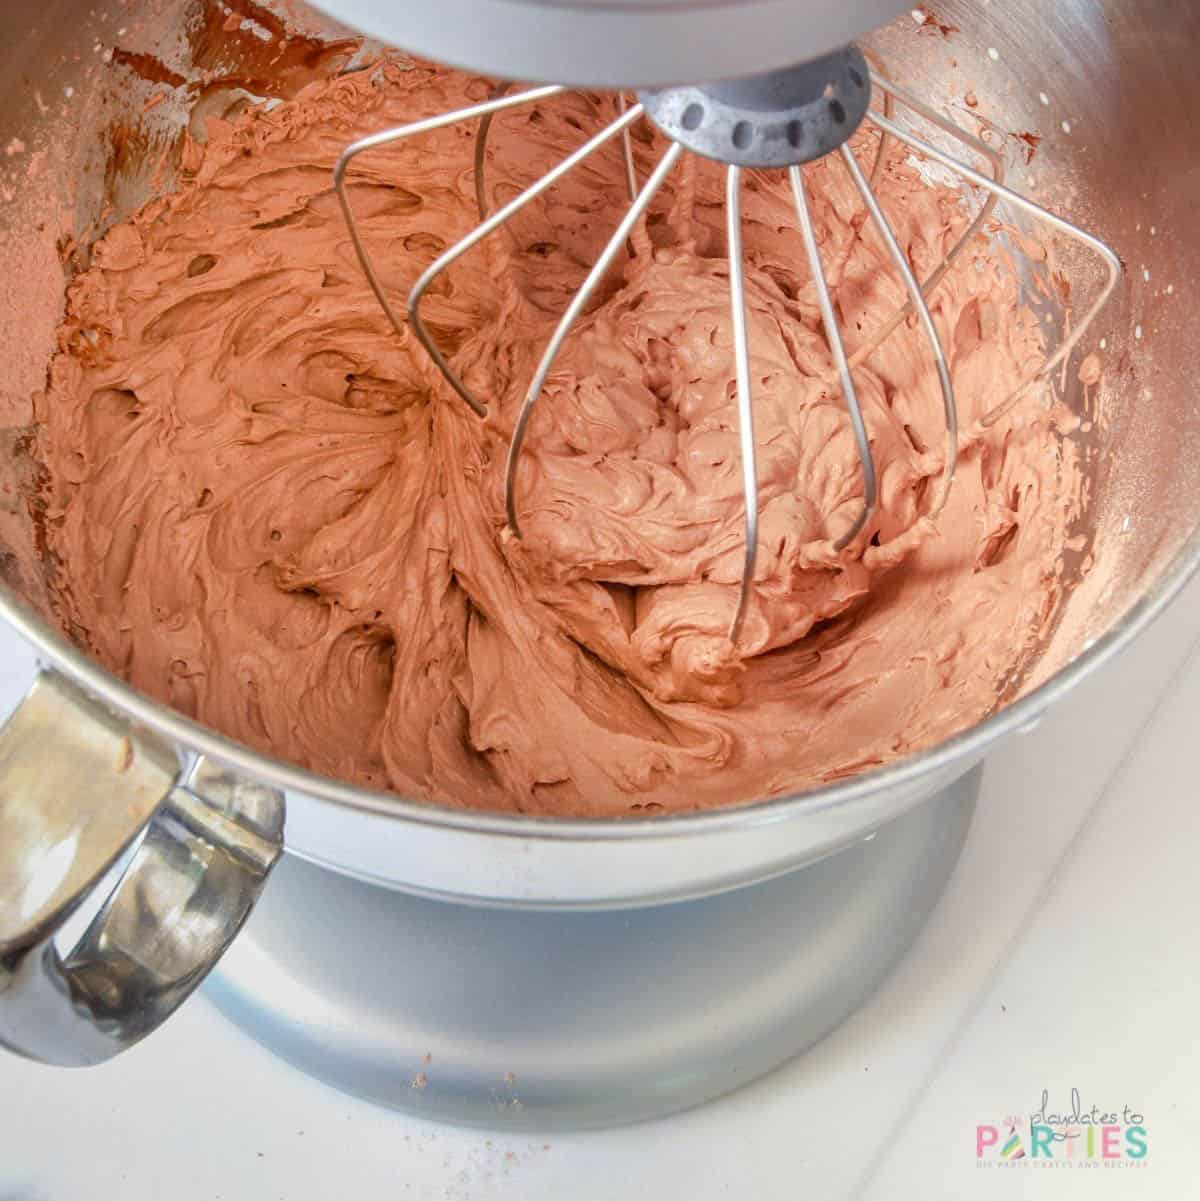 Finished chocolate beer whipped cream frosting in a stand mixer.